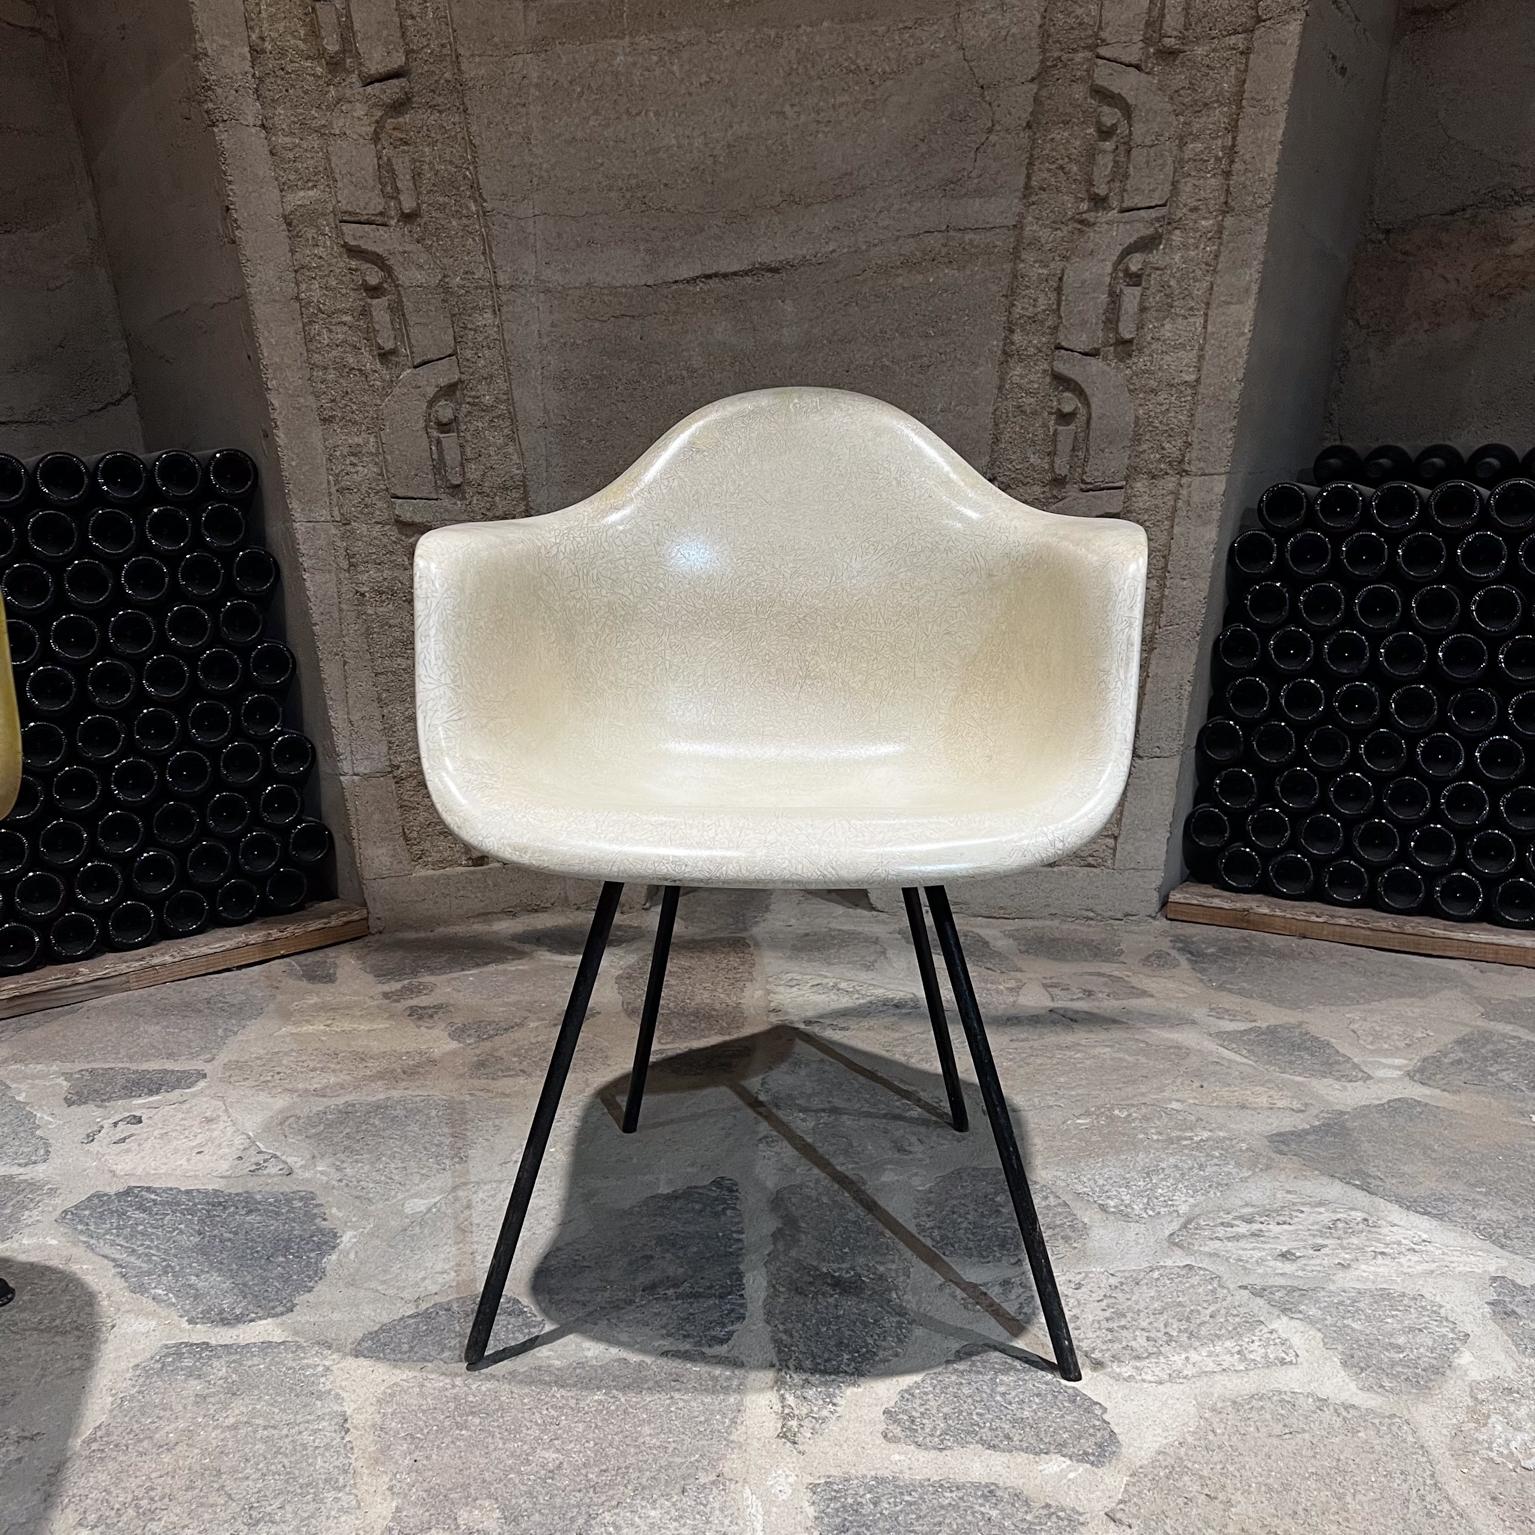 Gorgeous early production 1950s classic Eames for Herman Miller Dax Molded Fiberglass Shell Armchair 
parchment with black metal base
31 h x 24.5 w x 23.5 d Arm rest 25 Seat 18
Preowned Original unrestored vintage condition
Refer to all images
LA OC